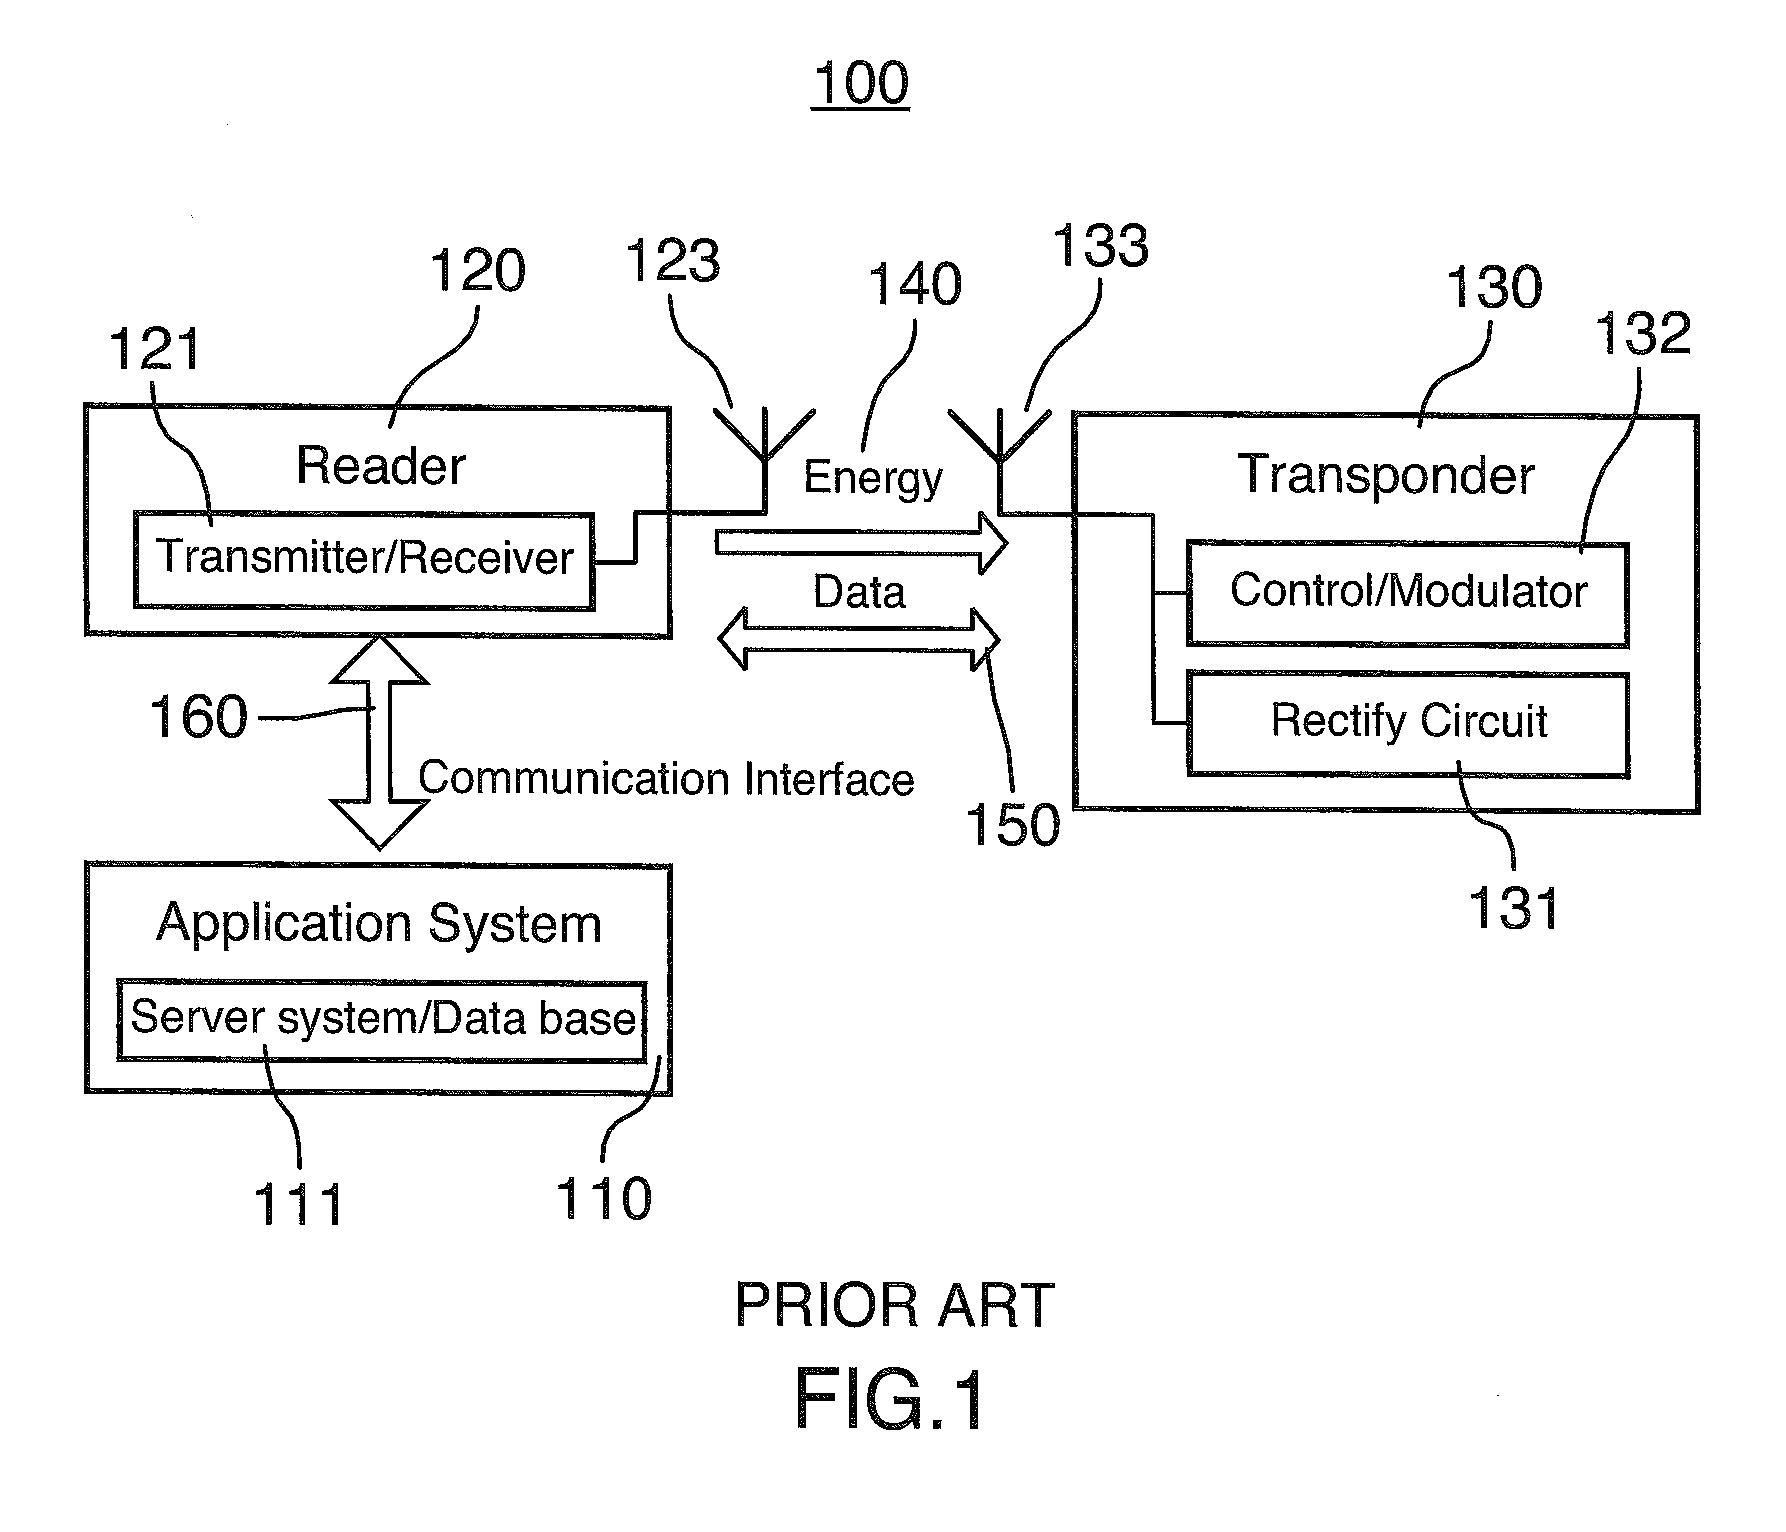 Transmission apparatus for a wireless device